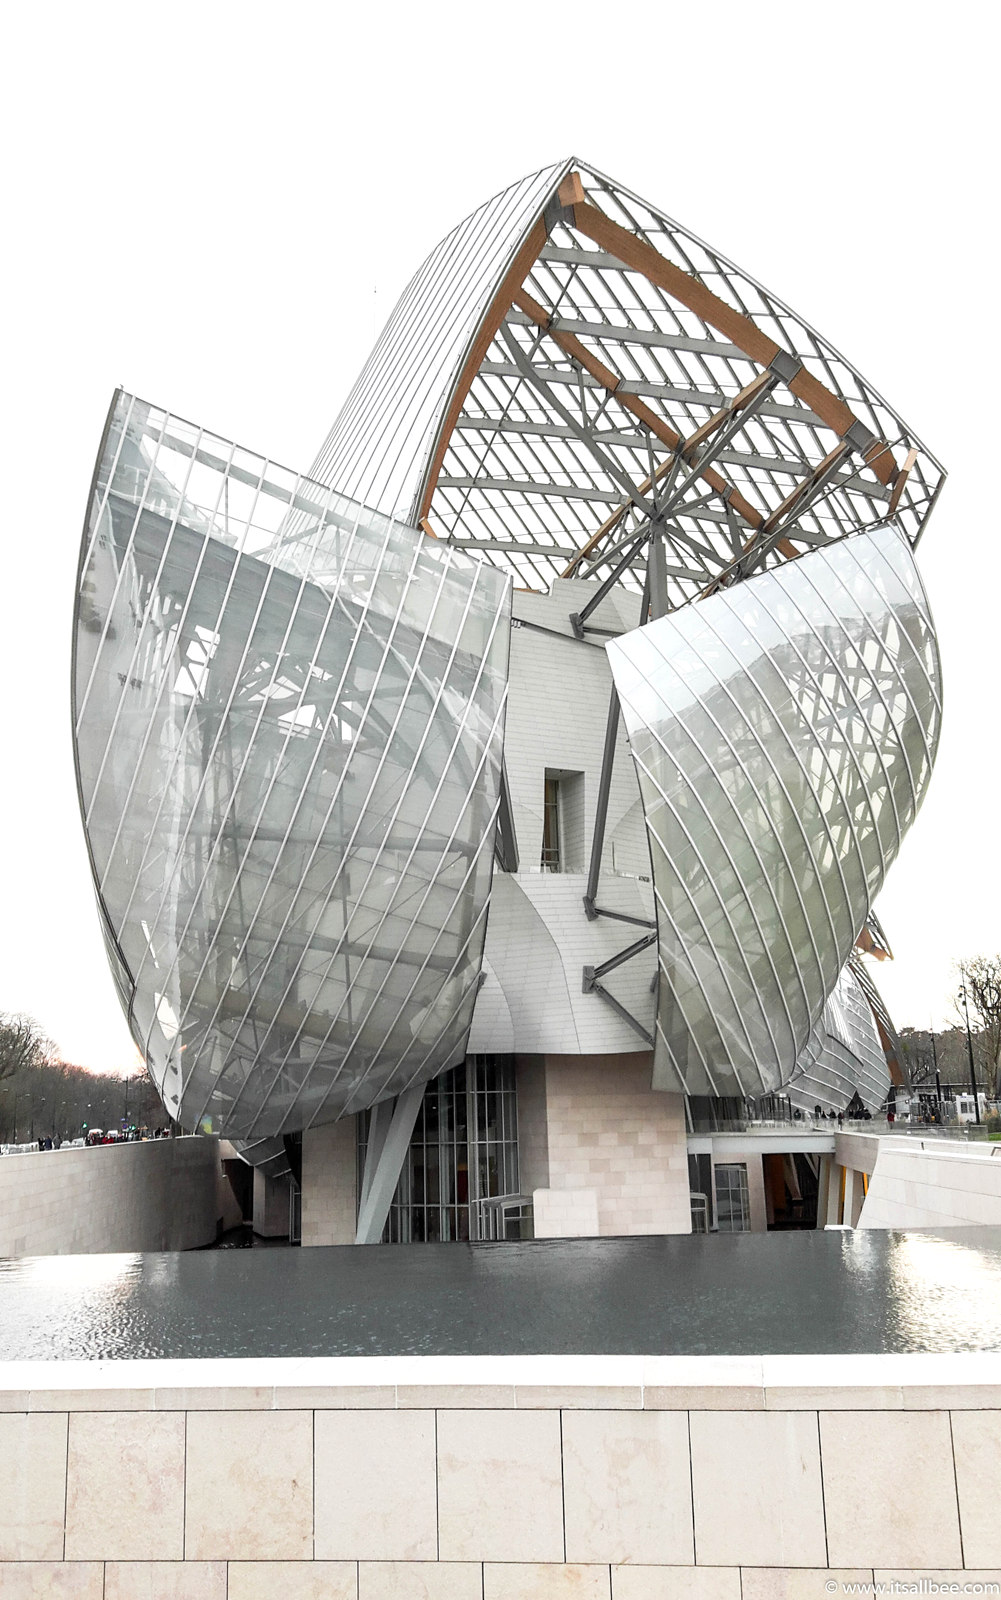 Due overse hende Tips On Visiting Fondation Louis Vuitton In Paris - ItsAllBee | Solo Travel  & Adventure Tips